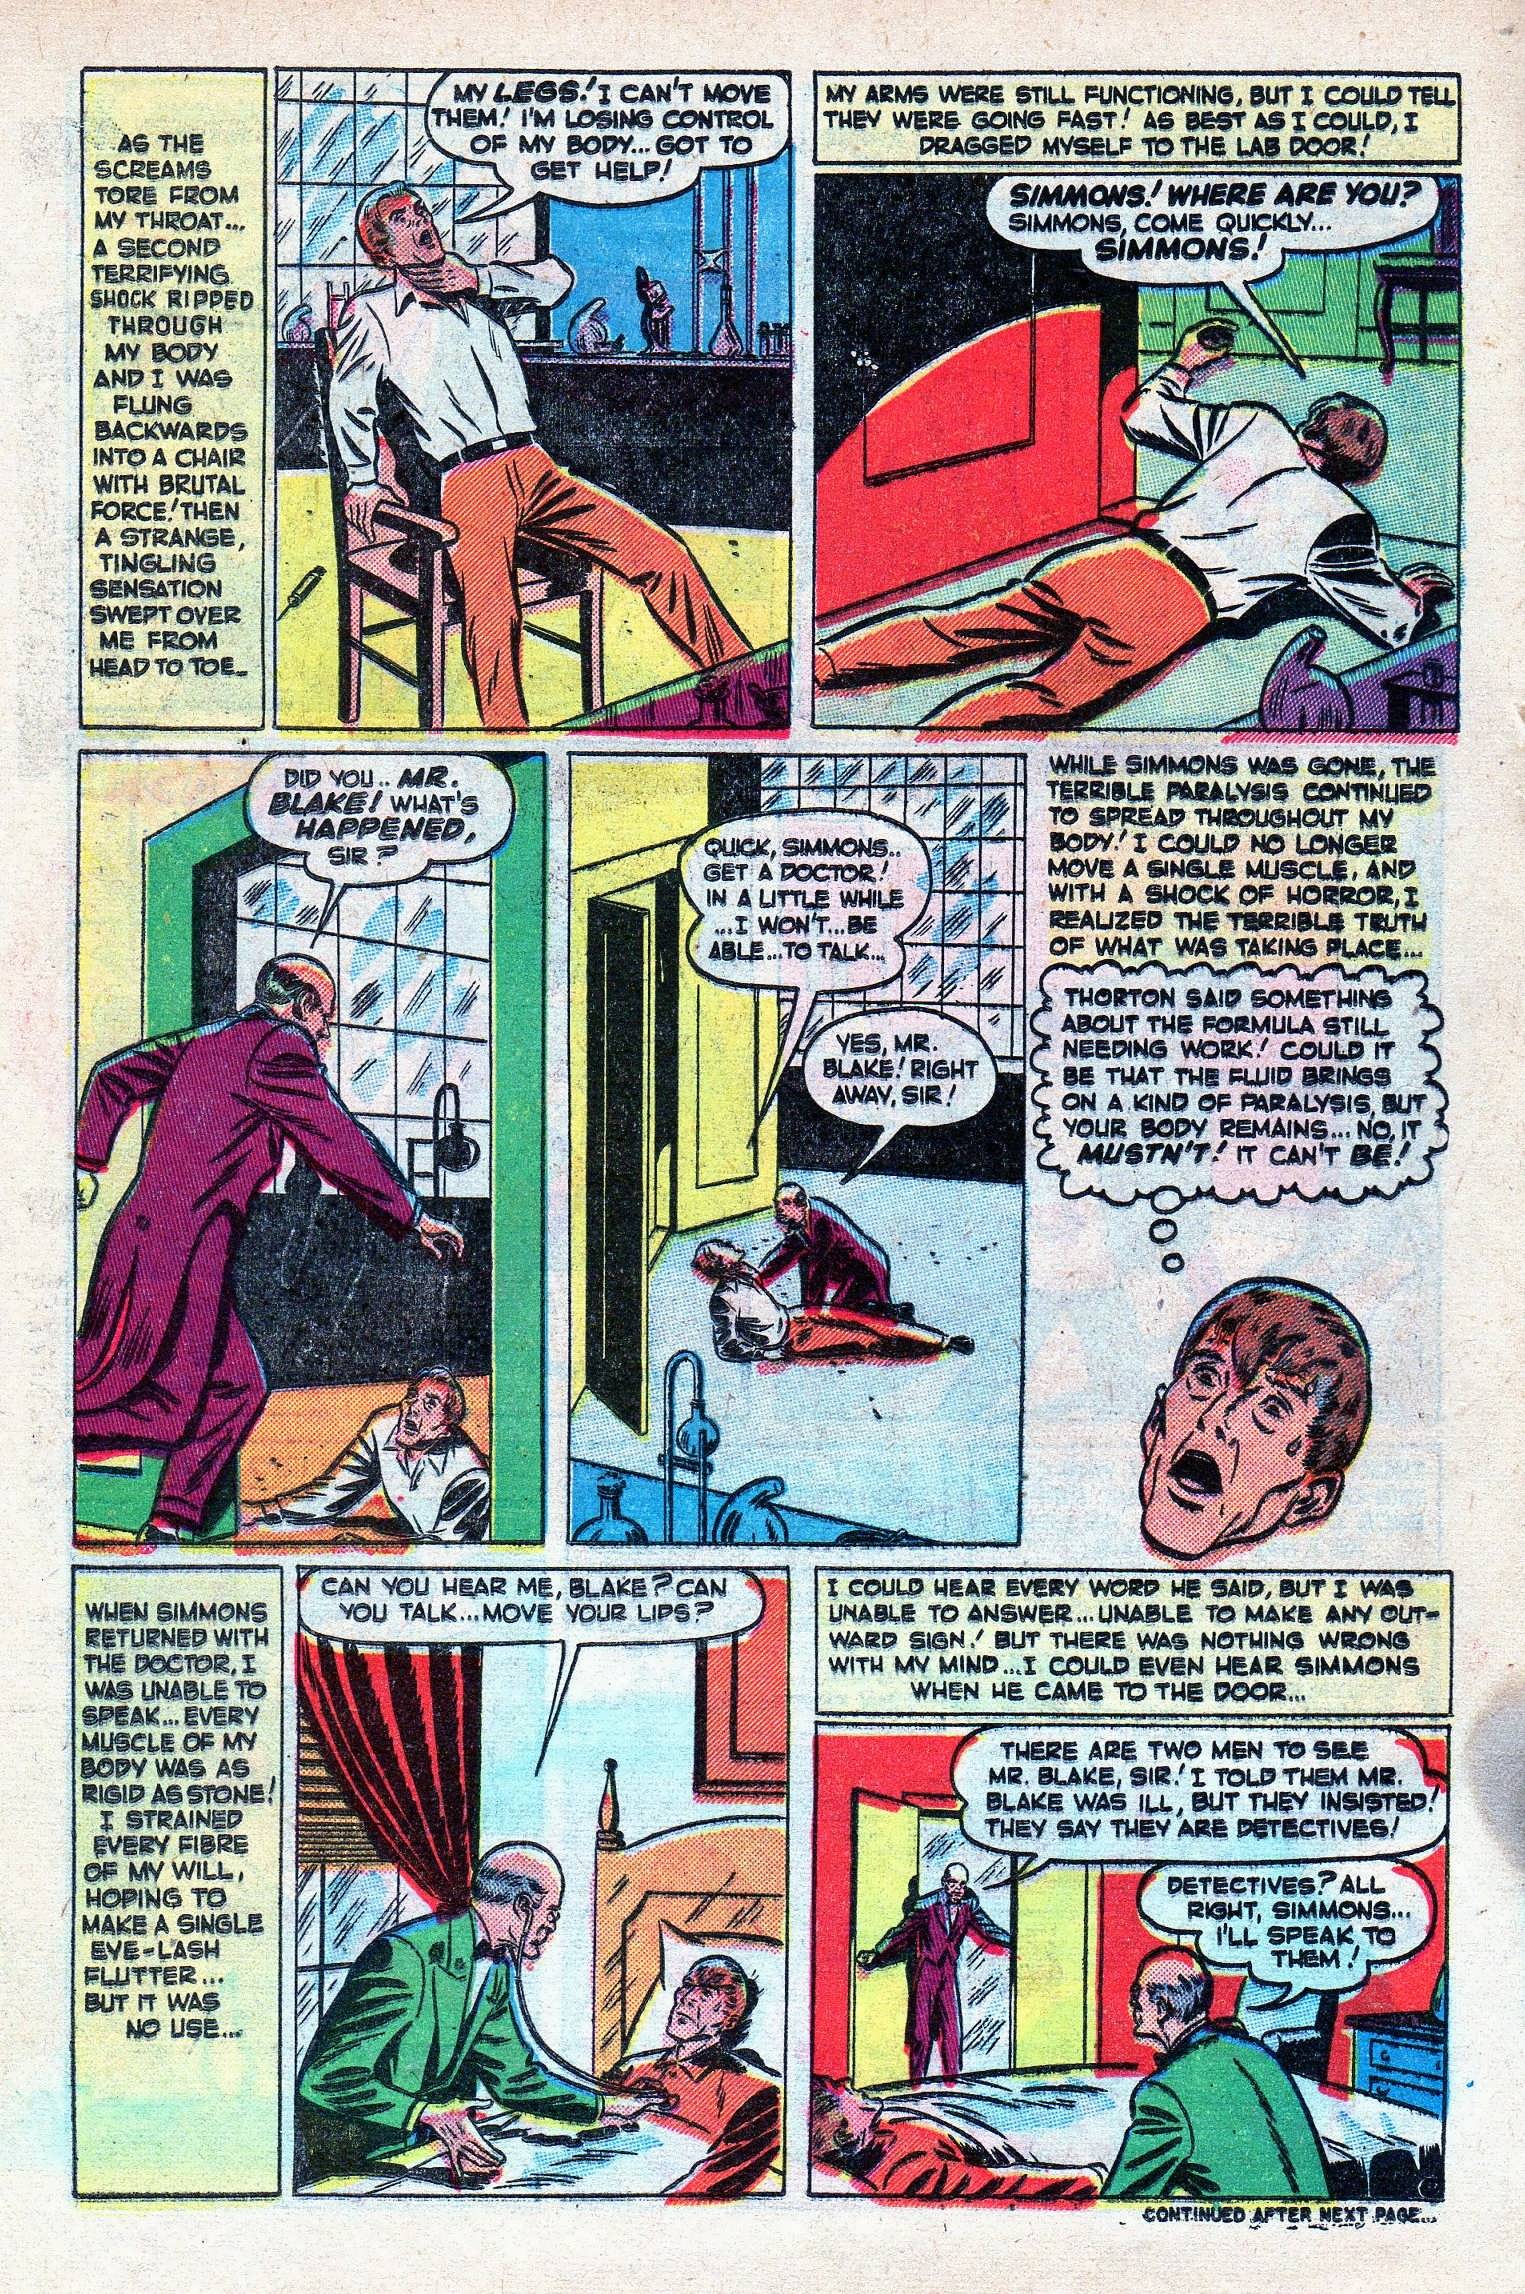 Marvel Tales (1949) 99 Page 11